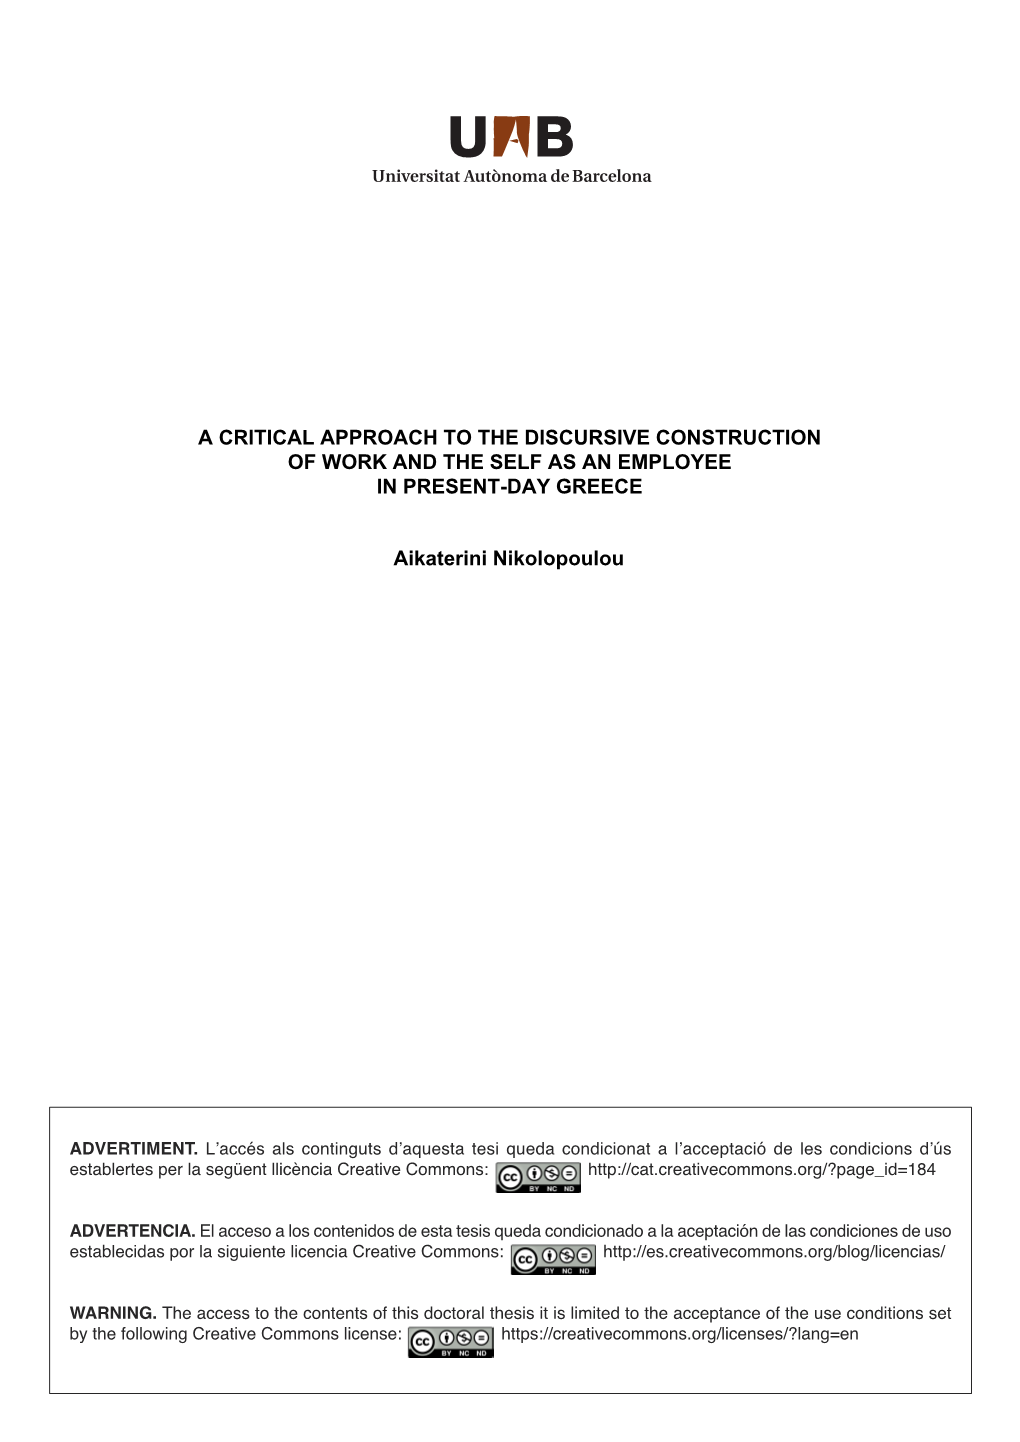 A Critical Approach to the Discursive Construction of Work and the Self As an Employee in Present-Day Greece